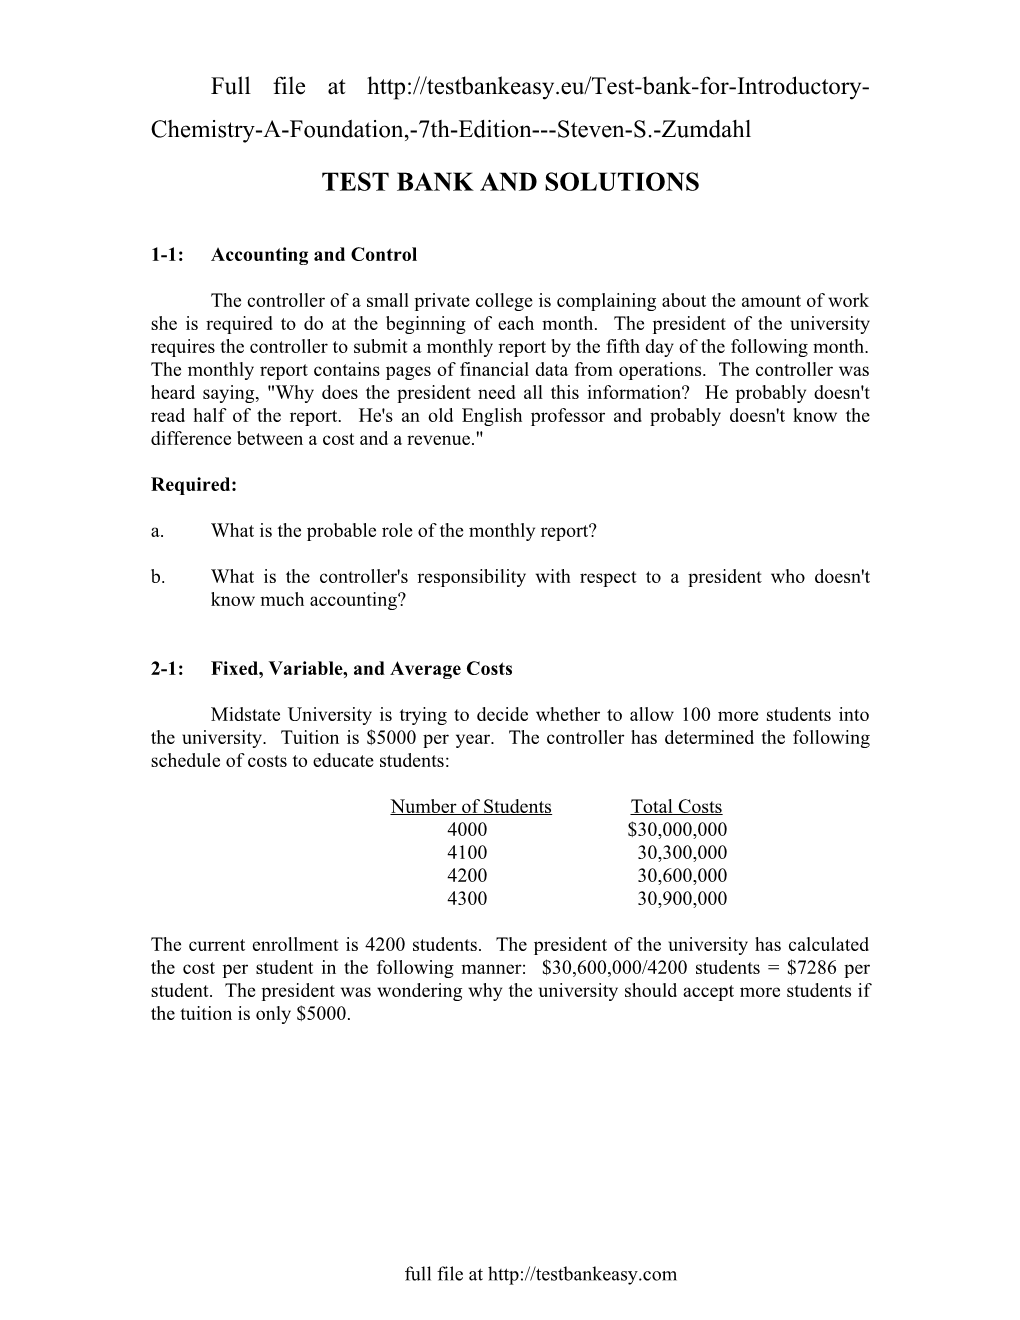 Part Iii: Test Bank and Solutions